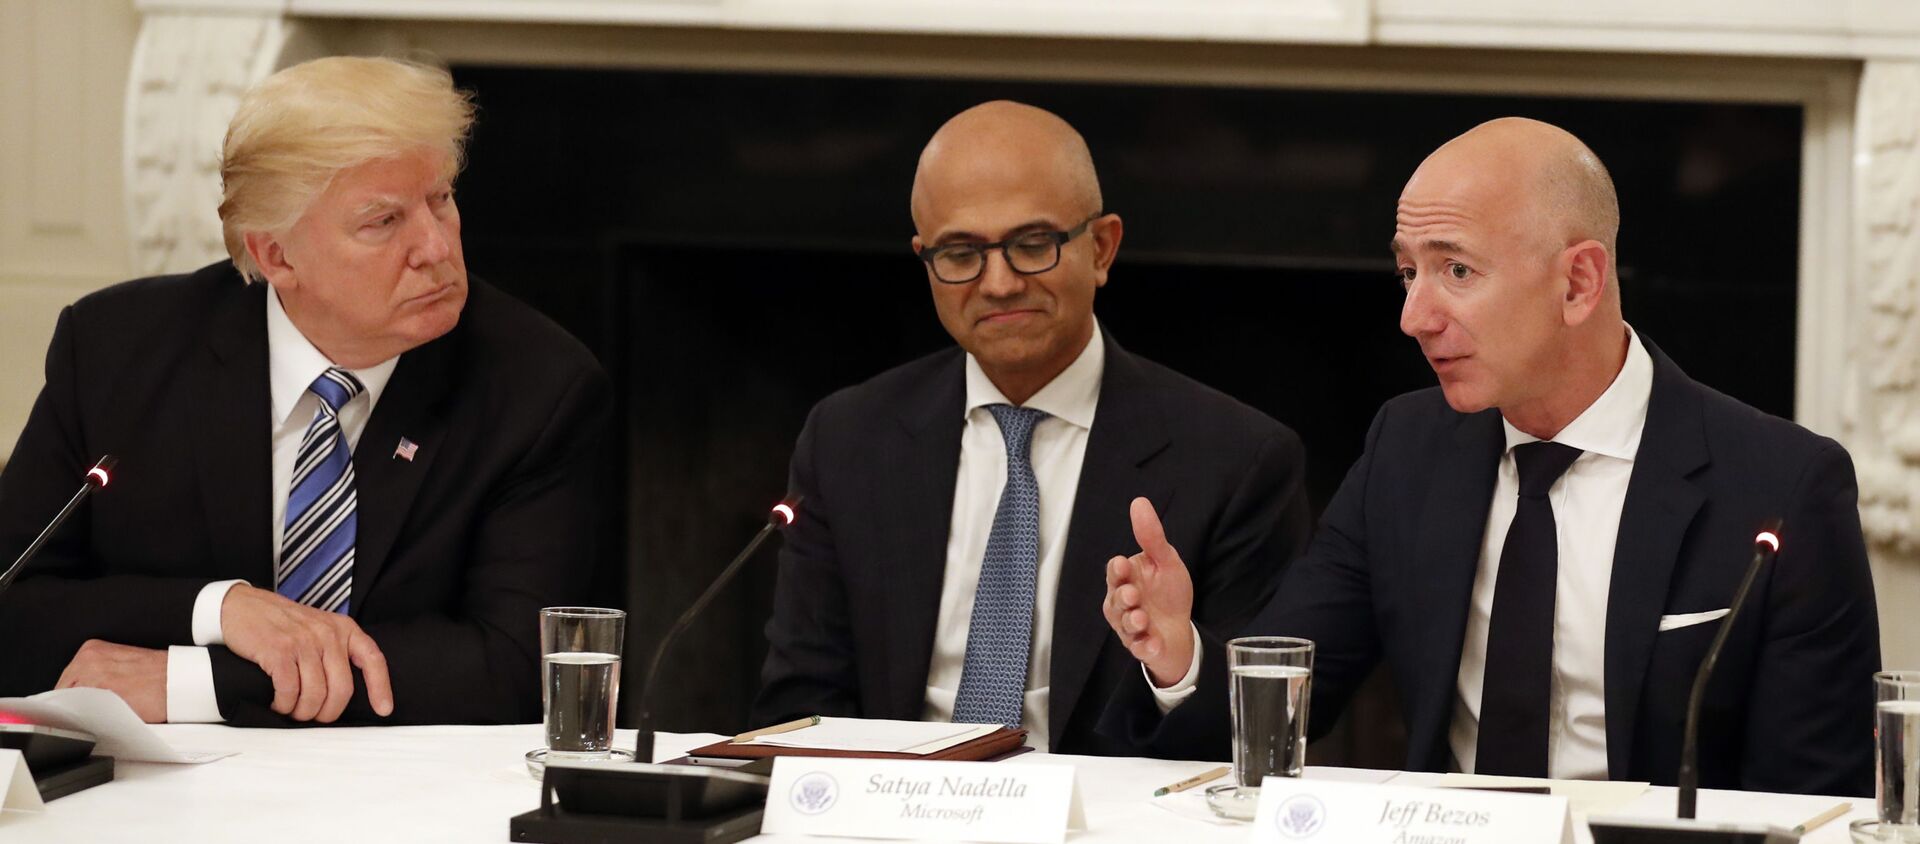 FILE - In this June 19, 2017, file photo, President Donald Trump, from left, and Satya Nadella, Chief Executive Officer of Microsoft, listen as Jeff Bezos, Chief Executive Officer of Amazon, speaks during an American Technology Council roundtable in the State Dinning Room of the White House in Washington - Sputnik International, 1920, 15.02.2020